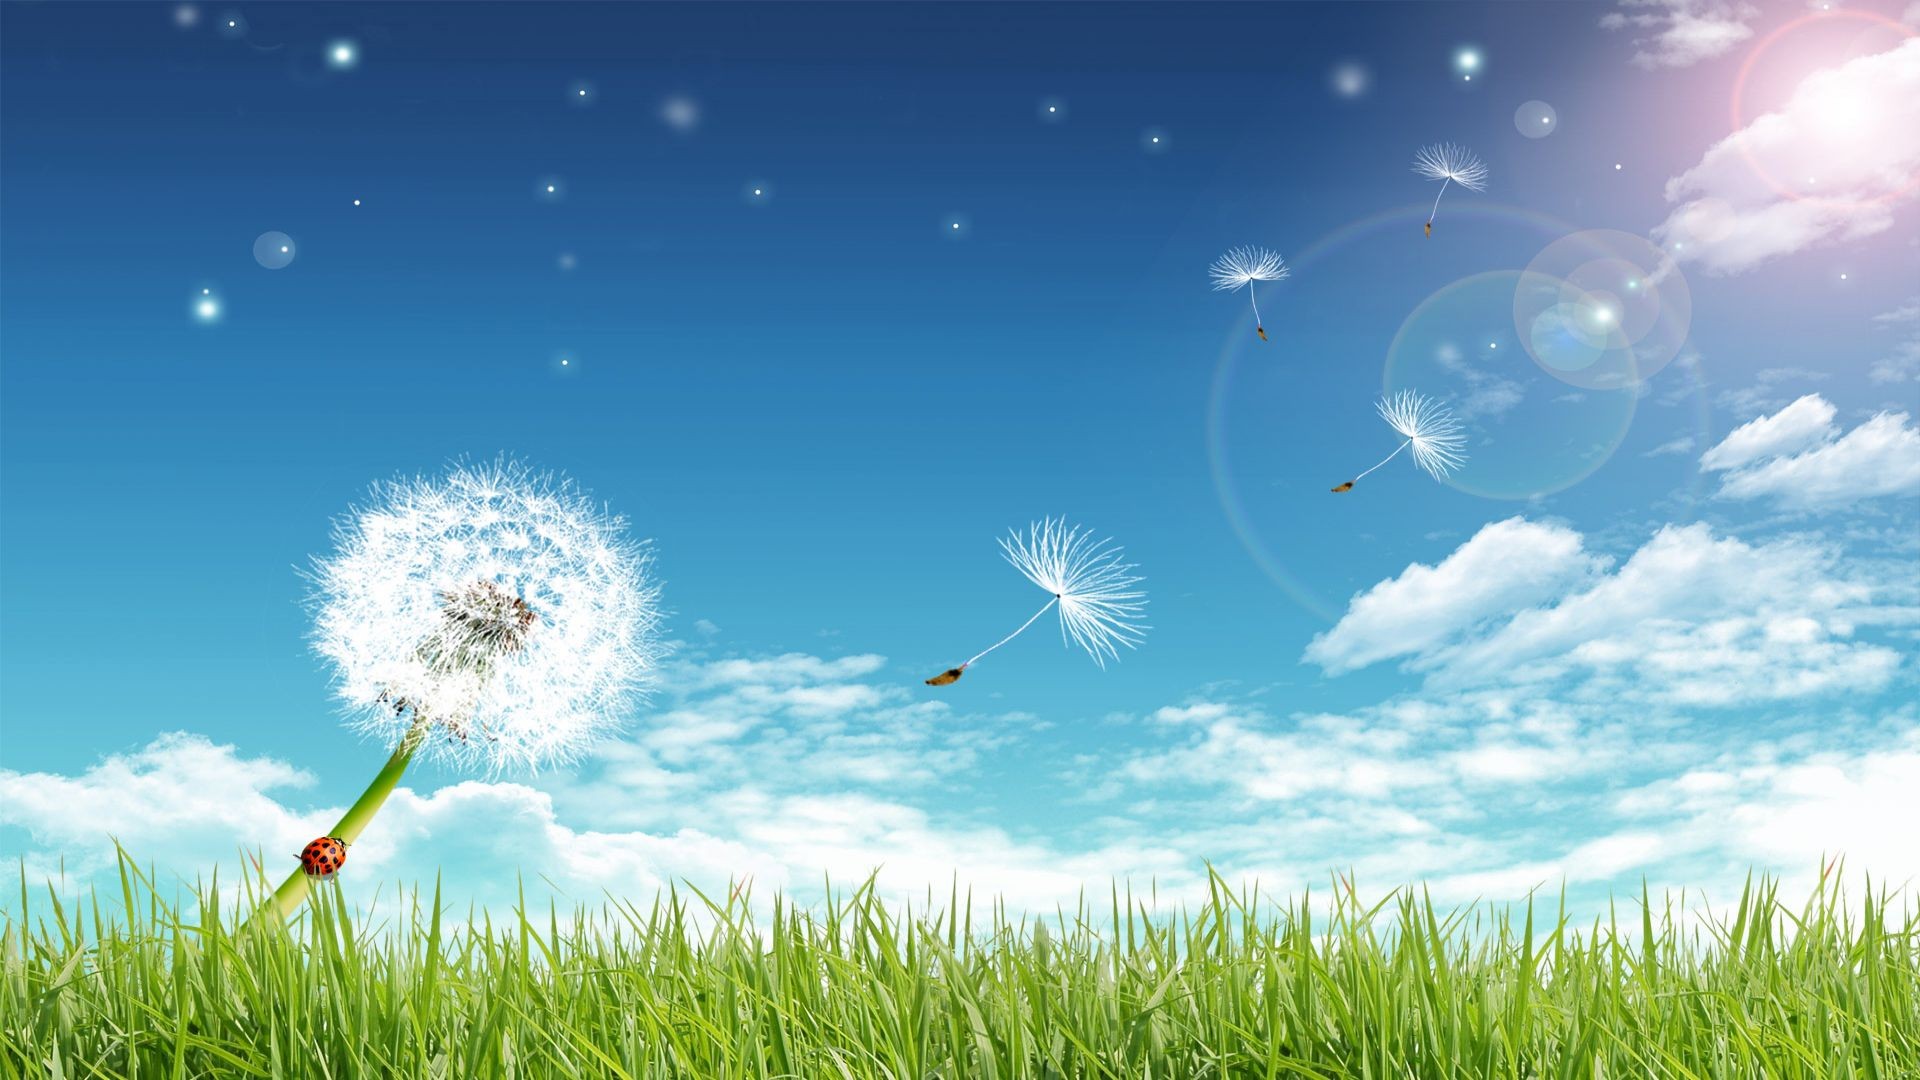 General 1920x1080 sky grass plants digital art flowers bug insect